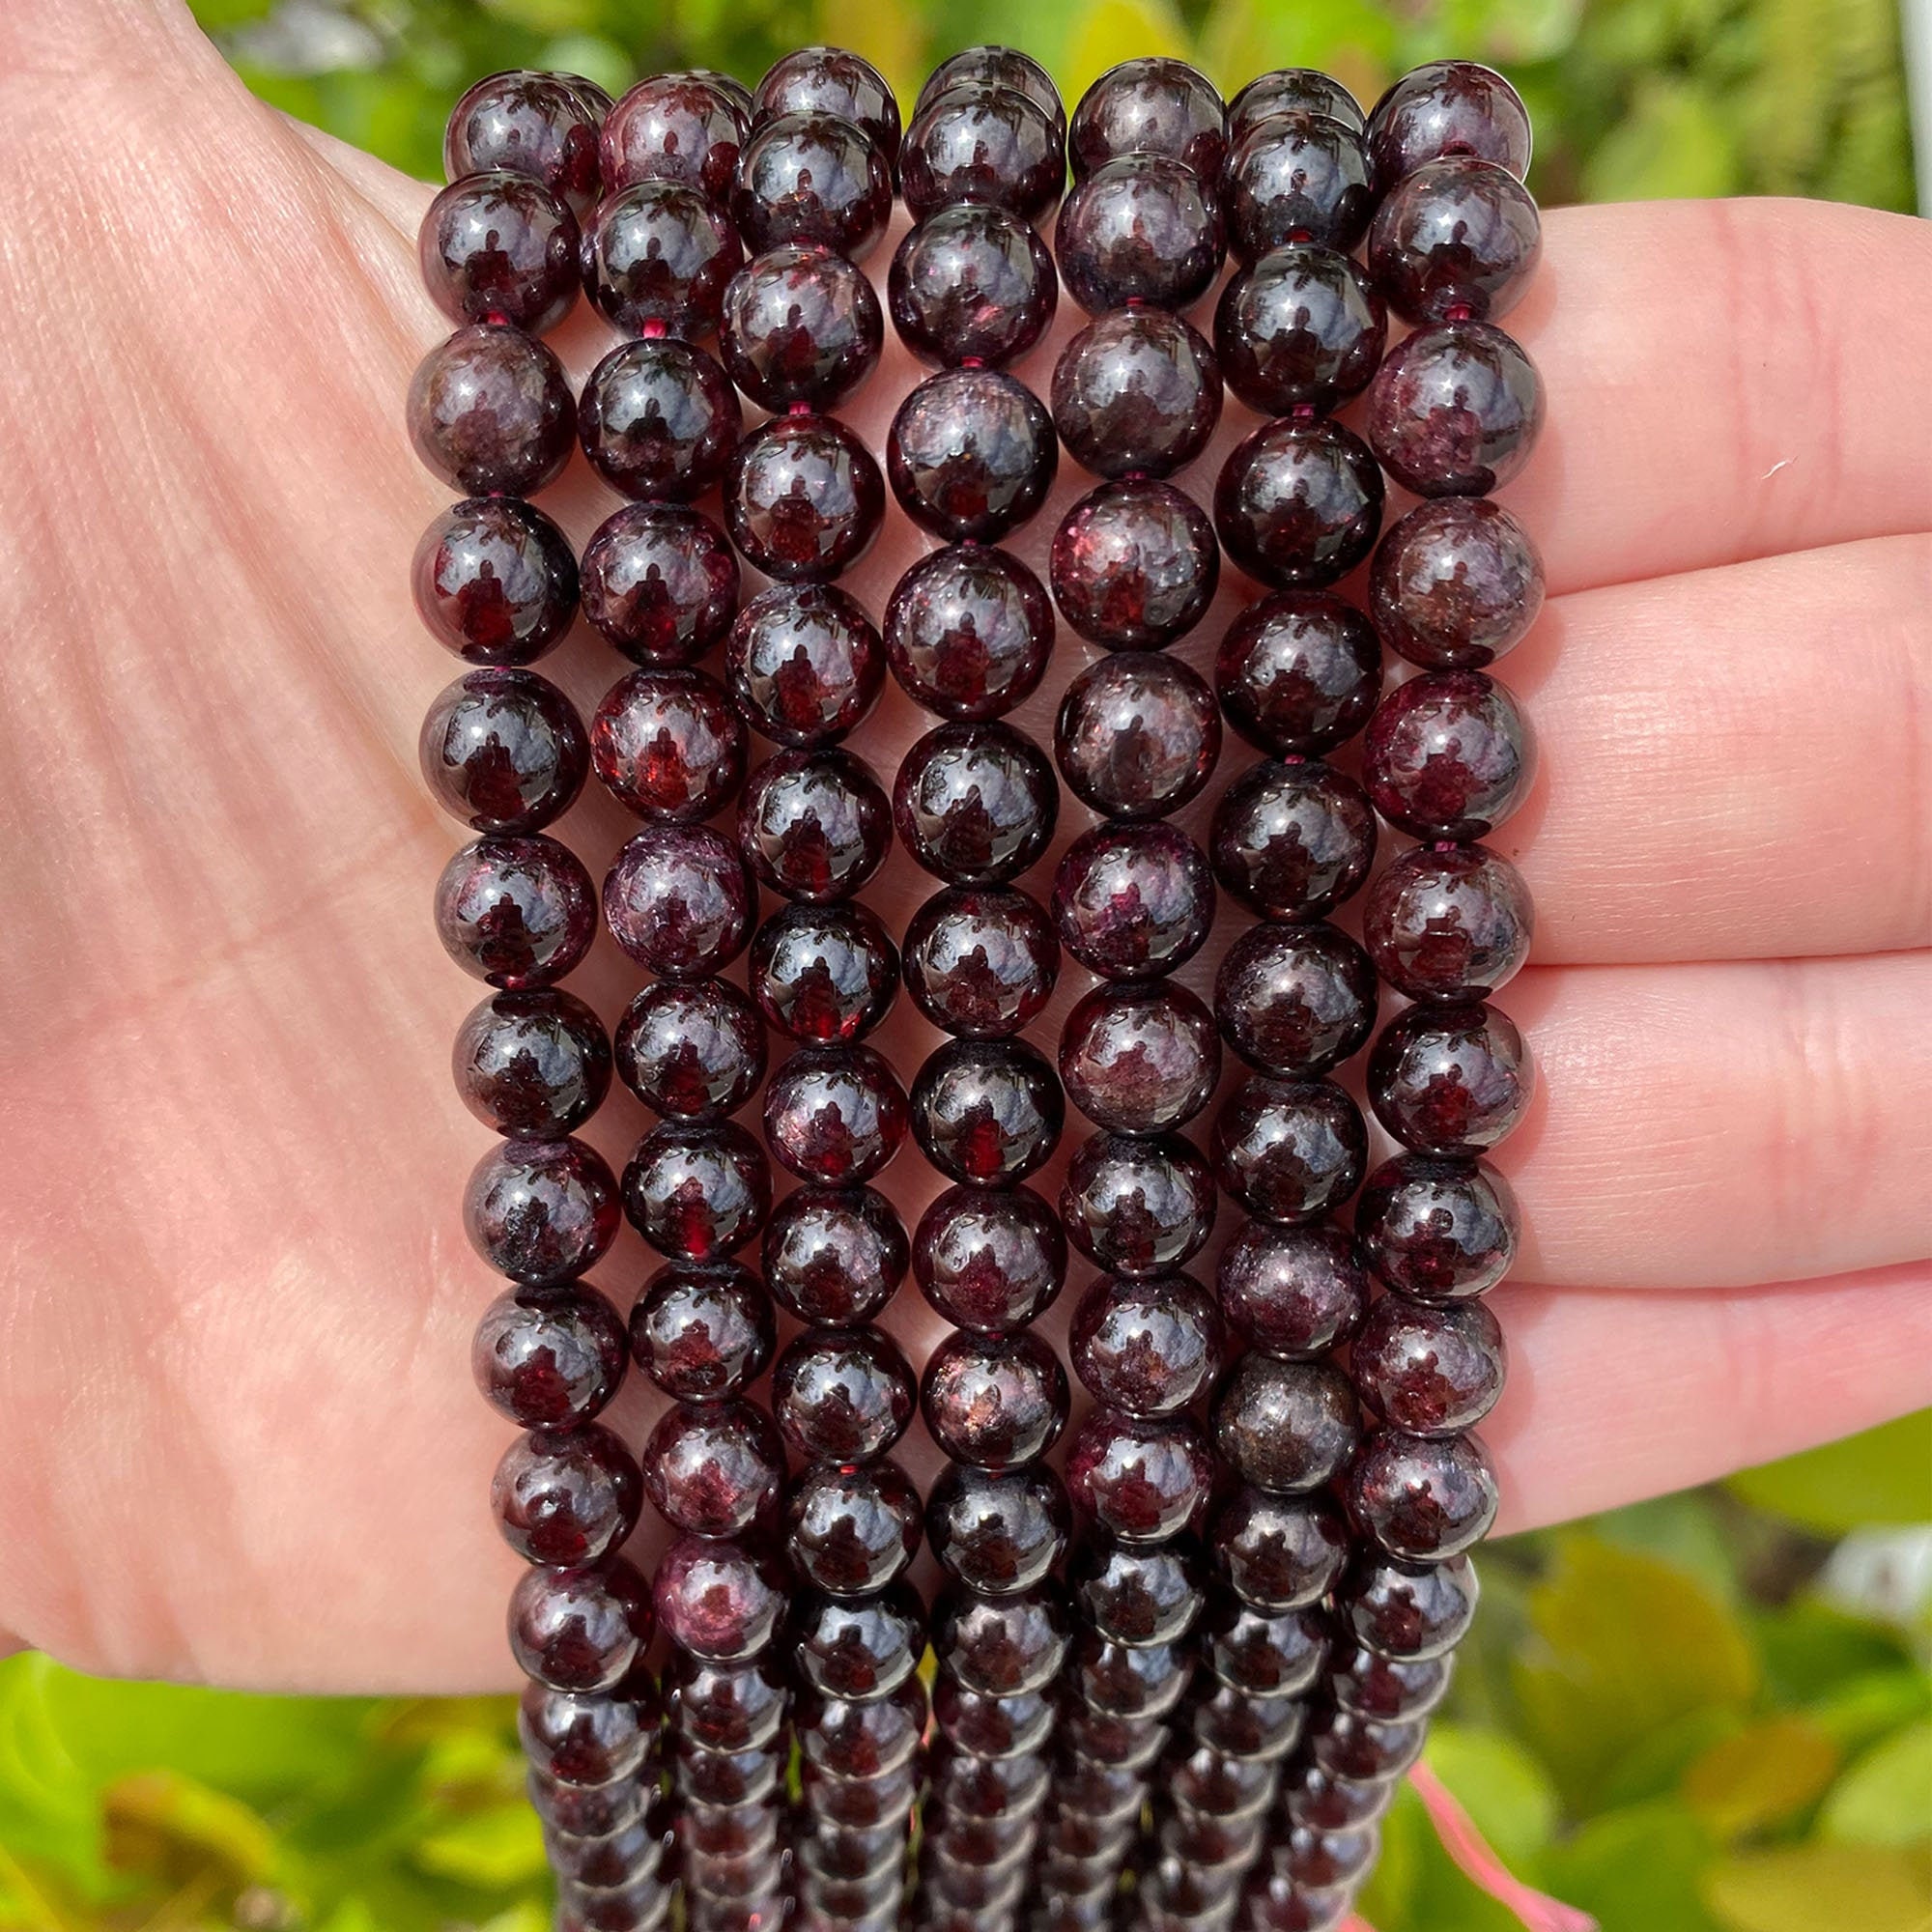 Thebeadchest Red Garnet Spade Beads (8mm), Adult Unisex